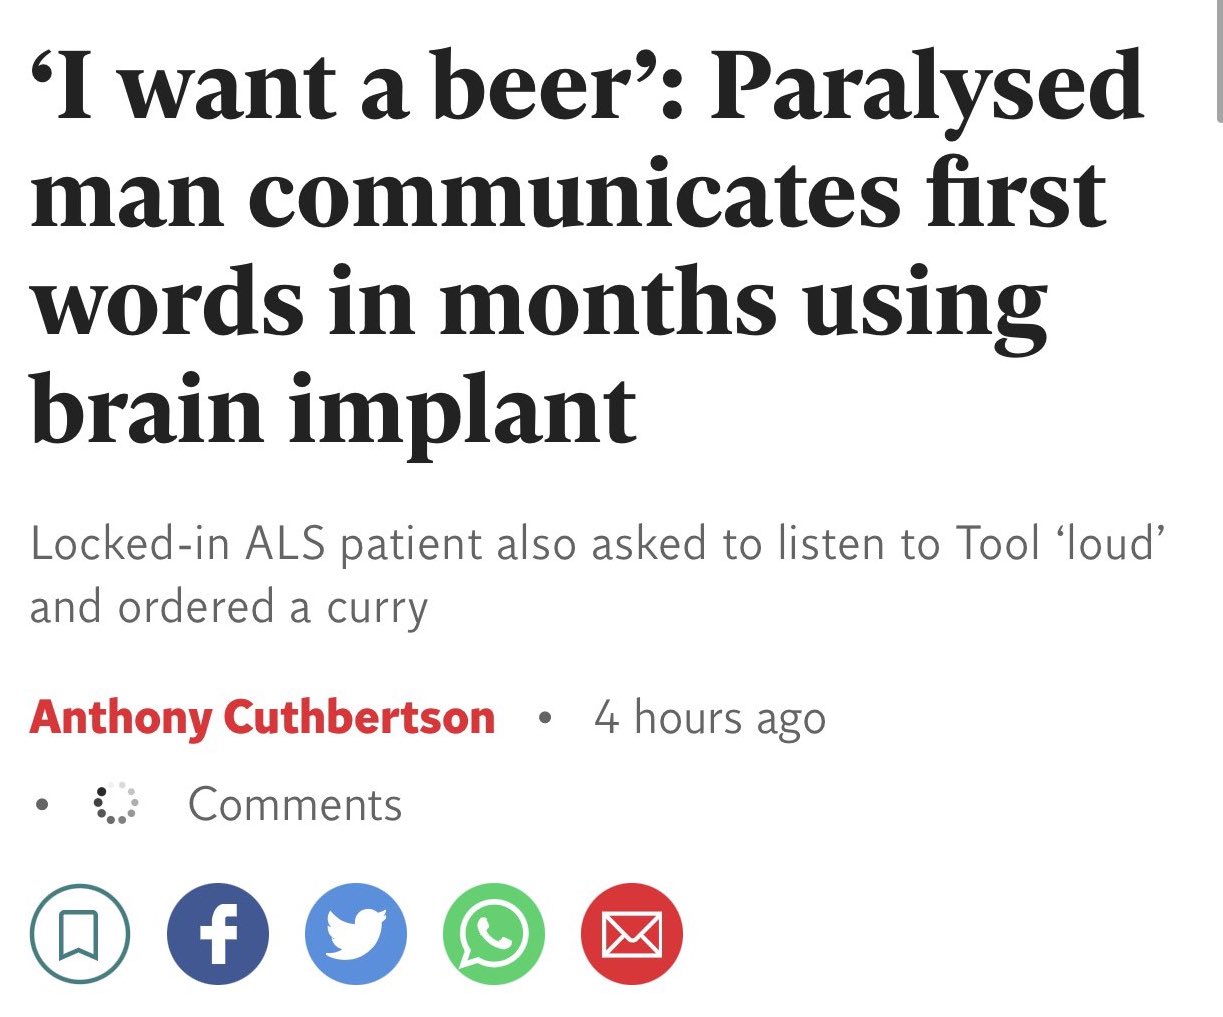 dudes posting wins - lvmh - 'I want a beer' Paralysed man communicates first words in months using brain implant Lockedin Als patient also asked to listen to Tool loud? and ordered a curry Anthony Cuthbertson 4 hours ago a f